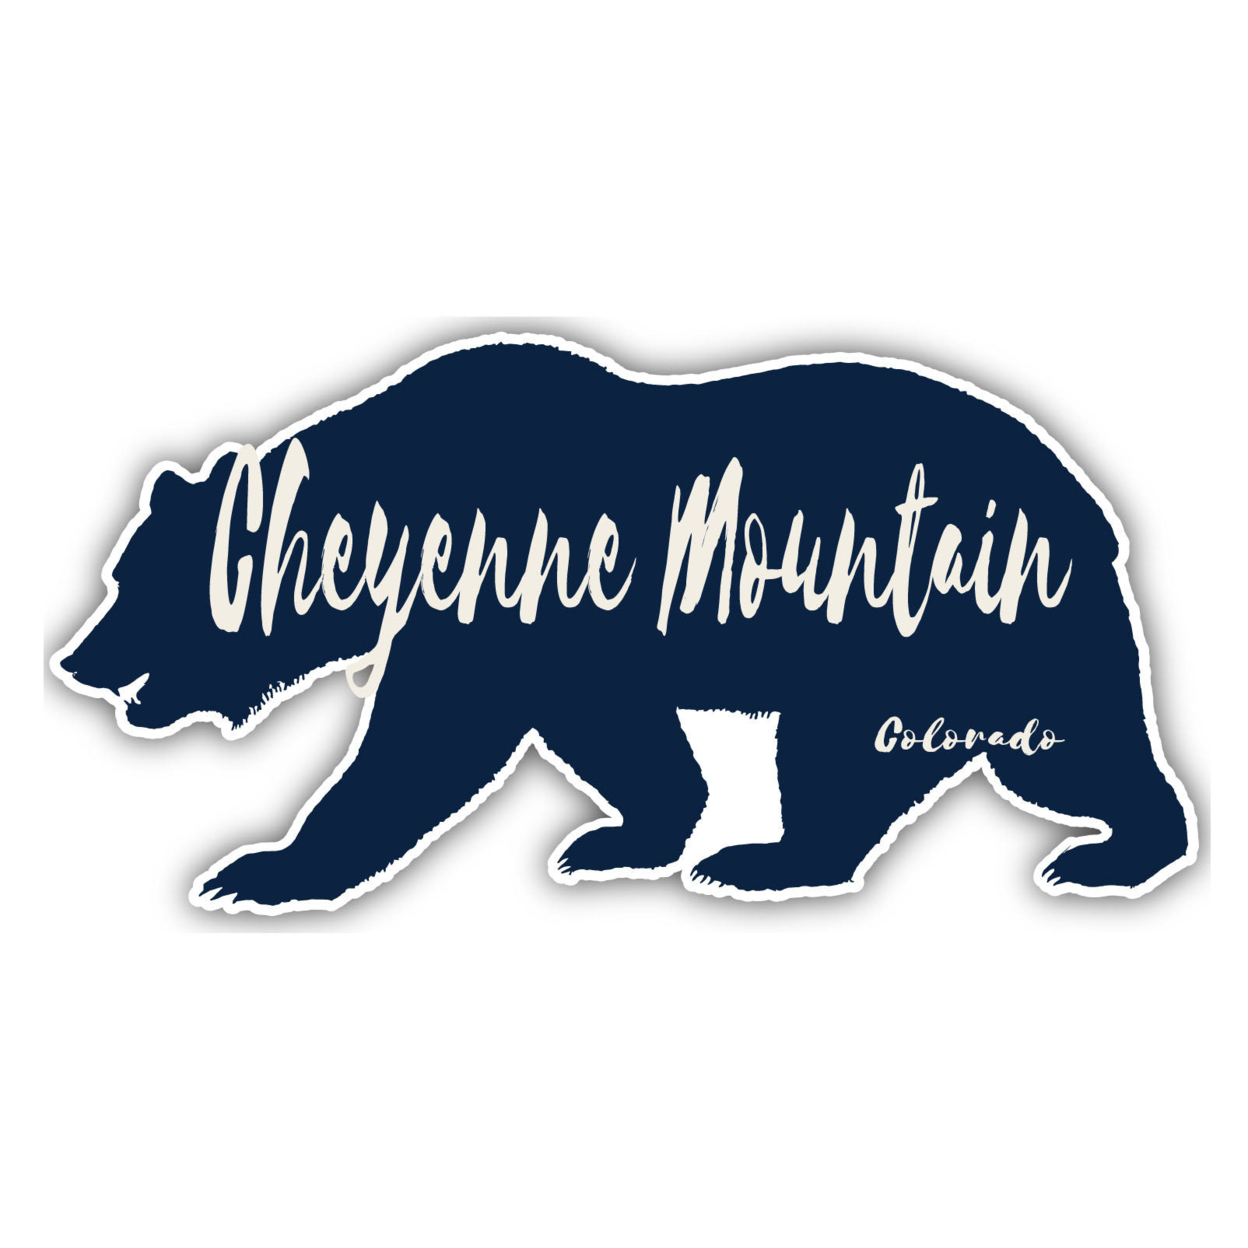 Cheyenne Mountain Colorado Souvenir Decorative Stickers (Choose Theme And Size) - 4-Pack, 4-Inch, Tent